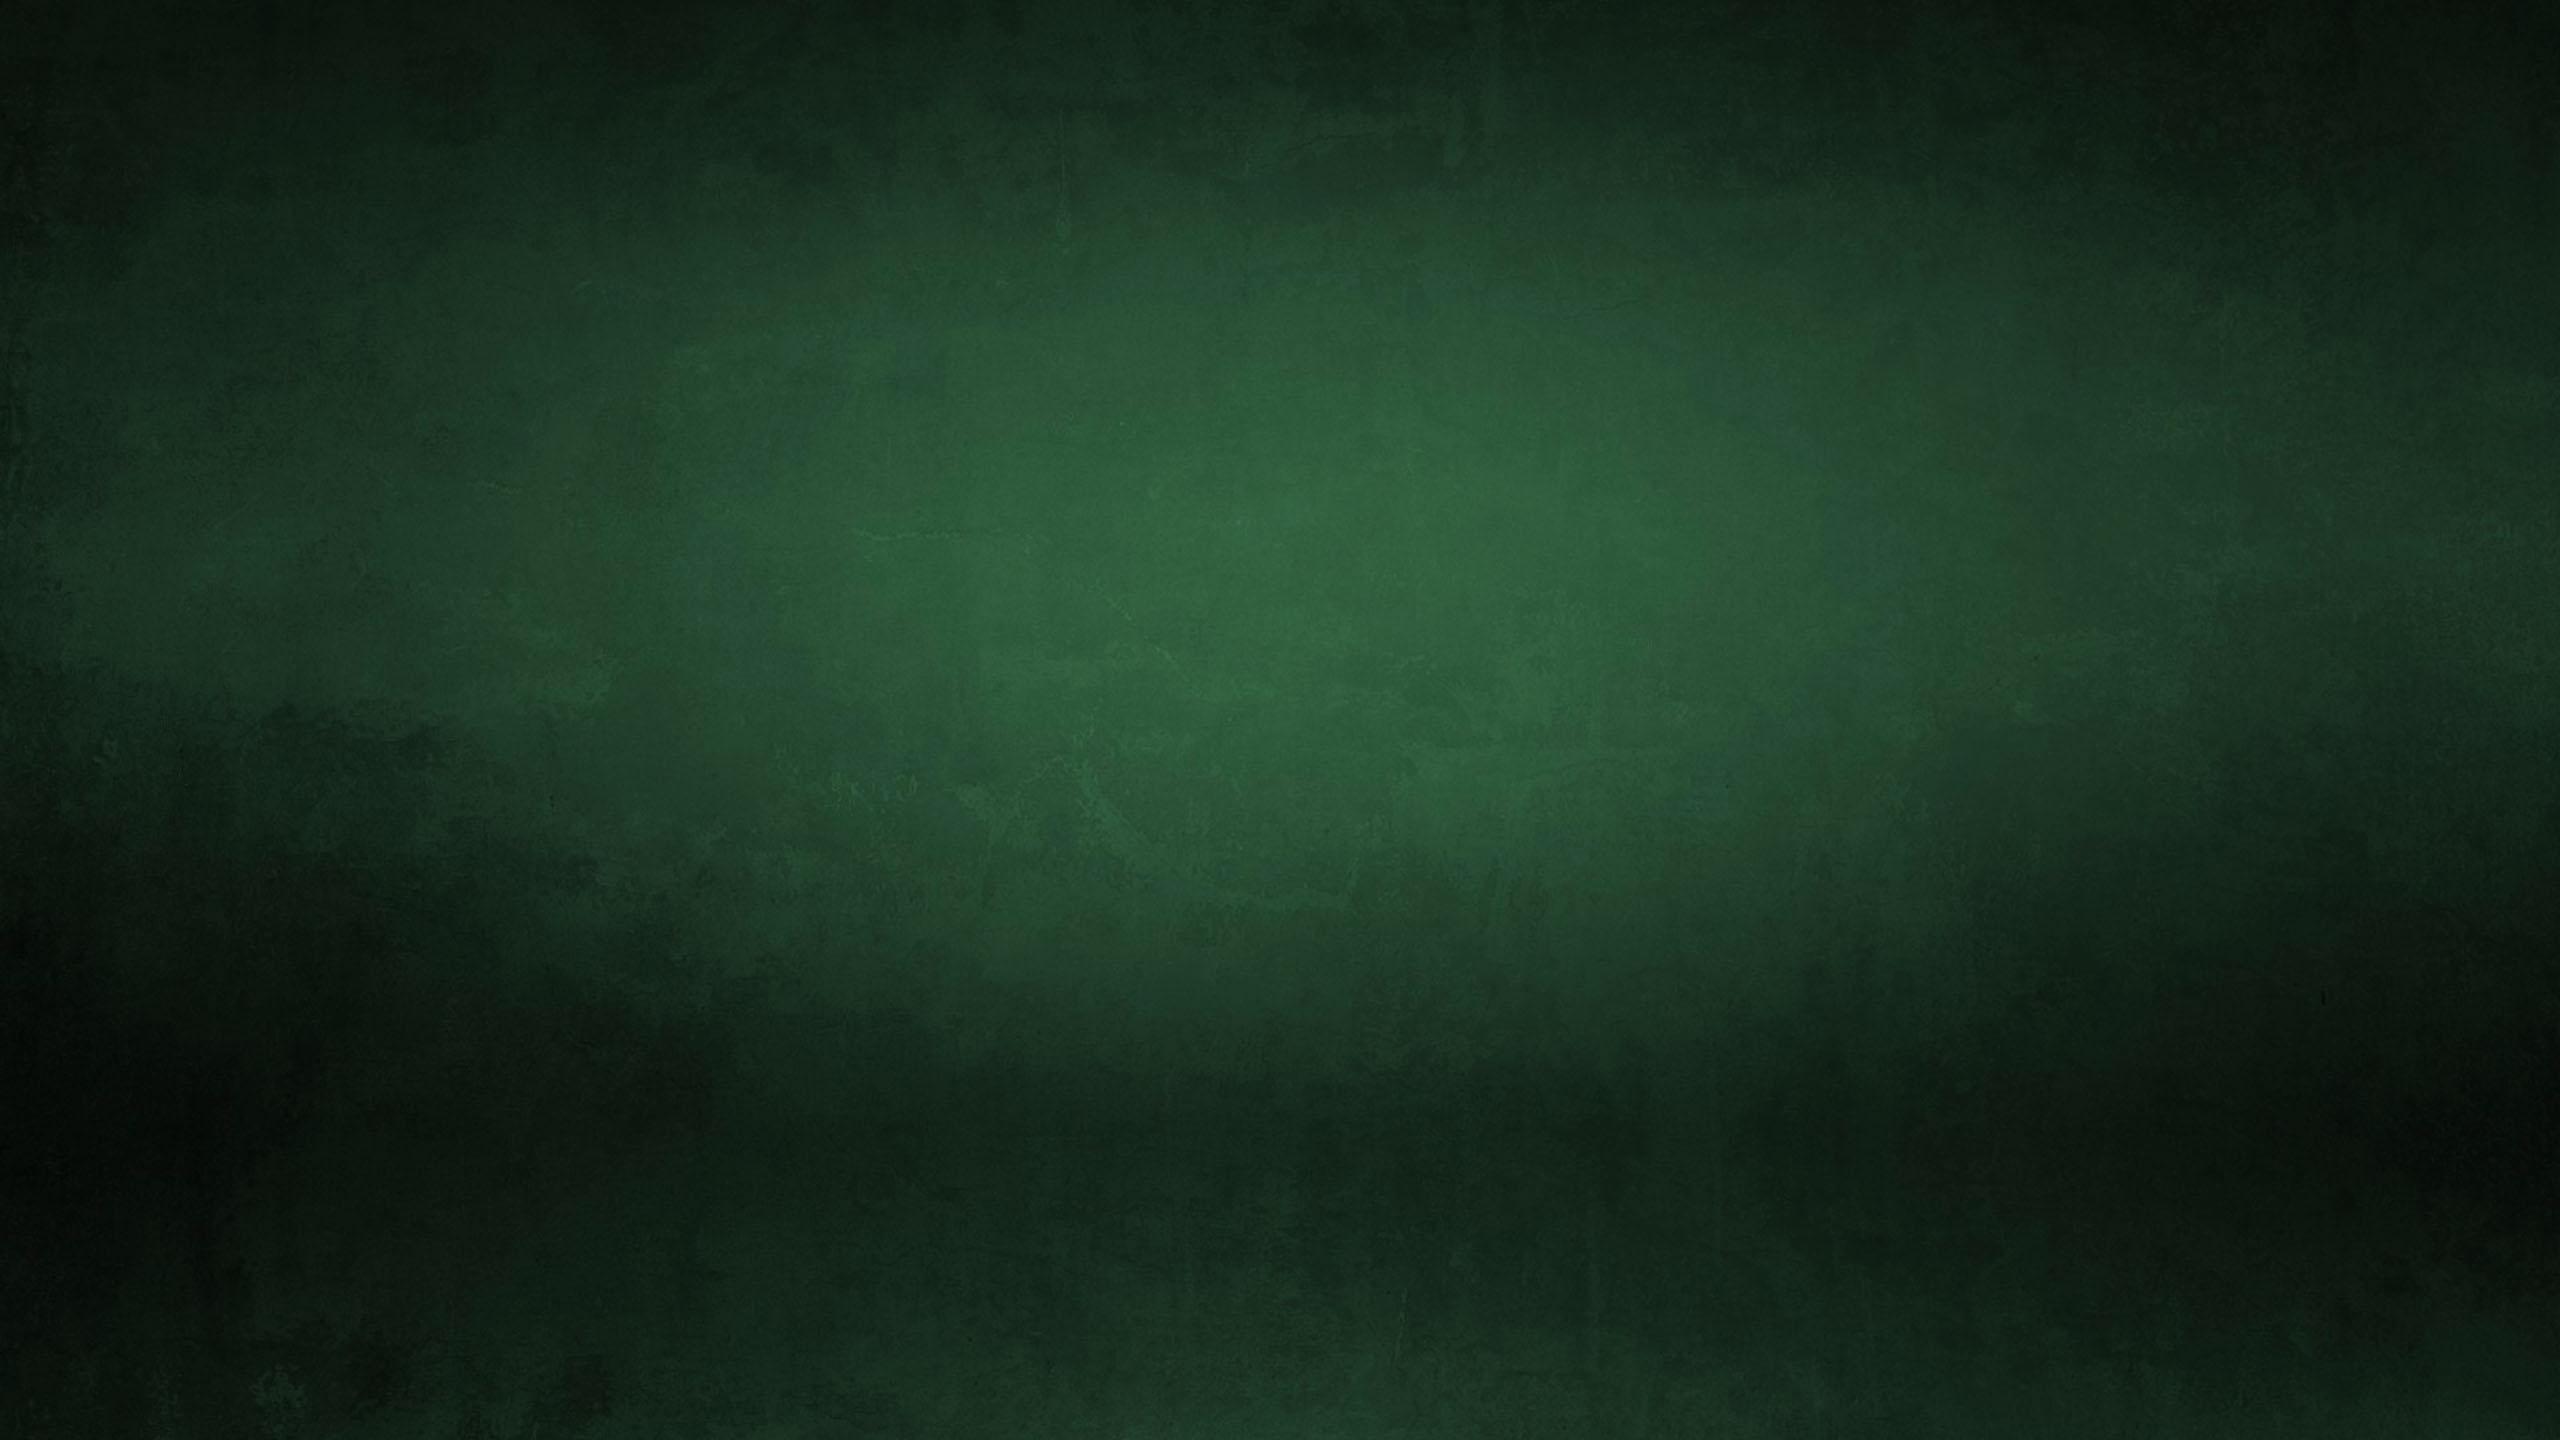 500+ Dark green background hd Images and wallpapers